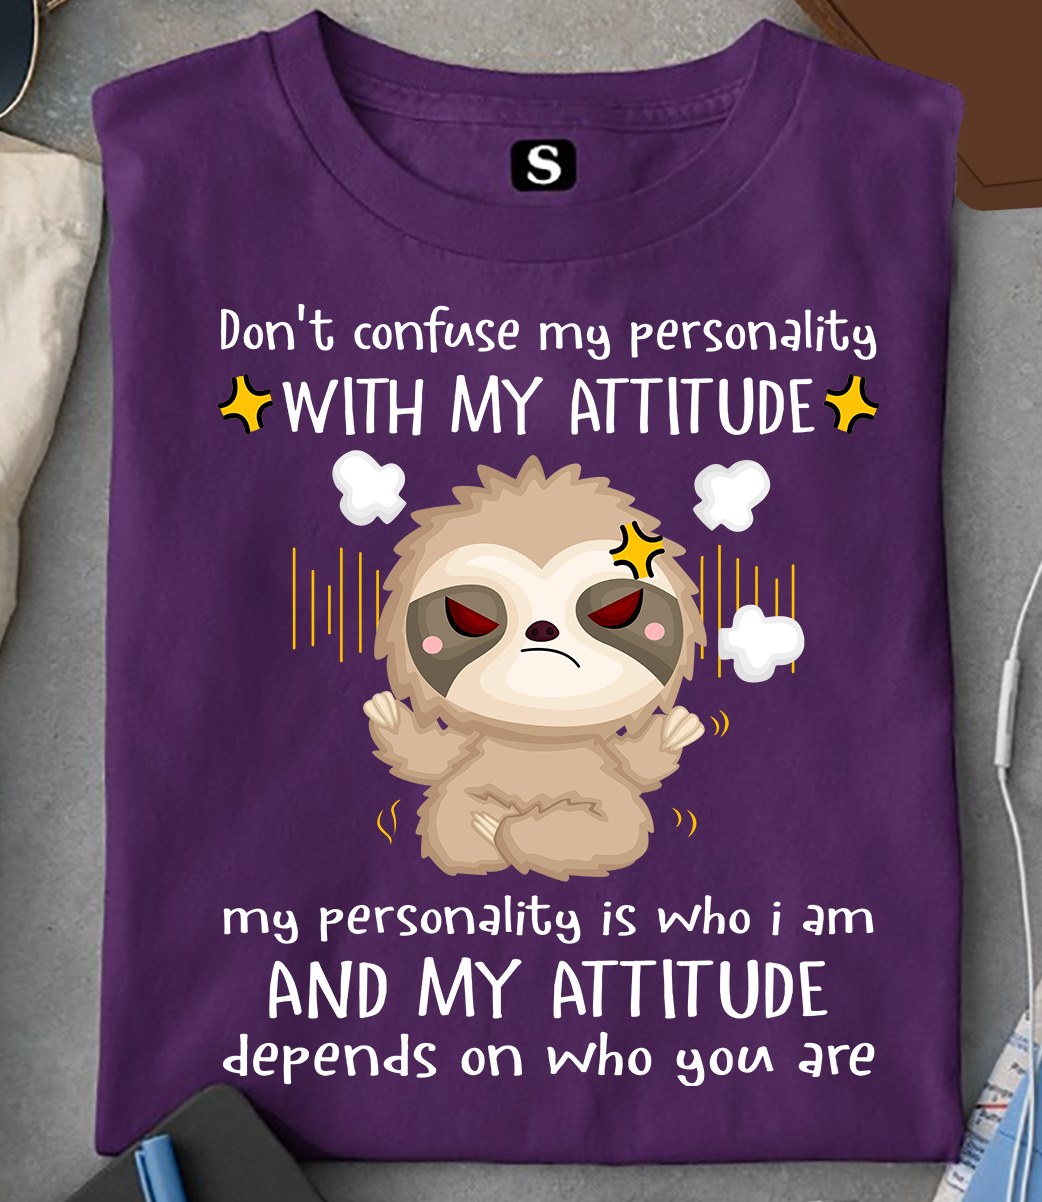 Don't confuse my personality with my attitude my personality is who i am - Grumpy sloth